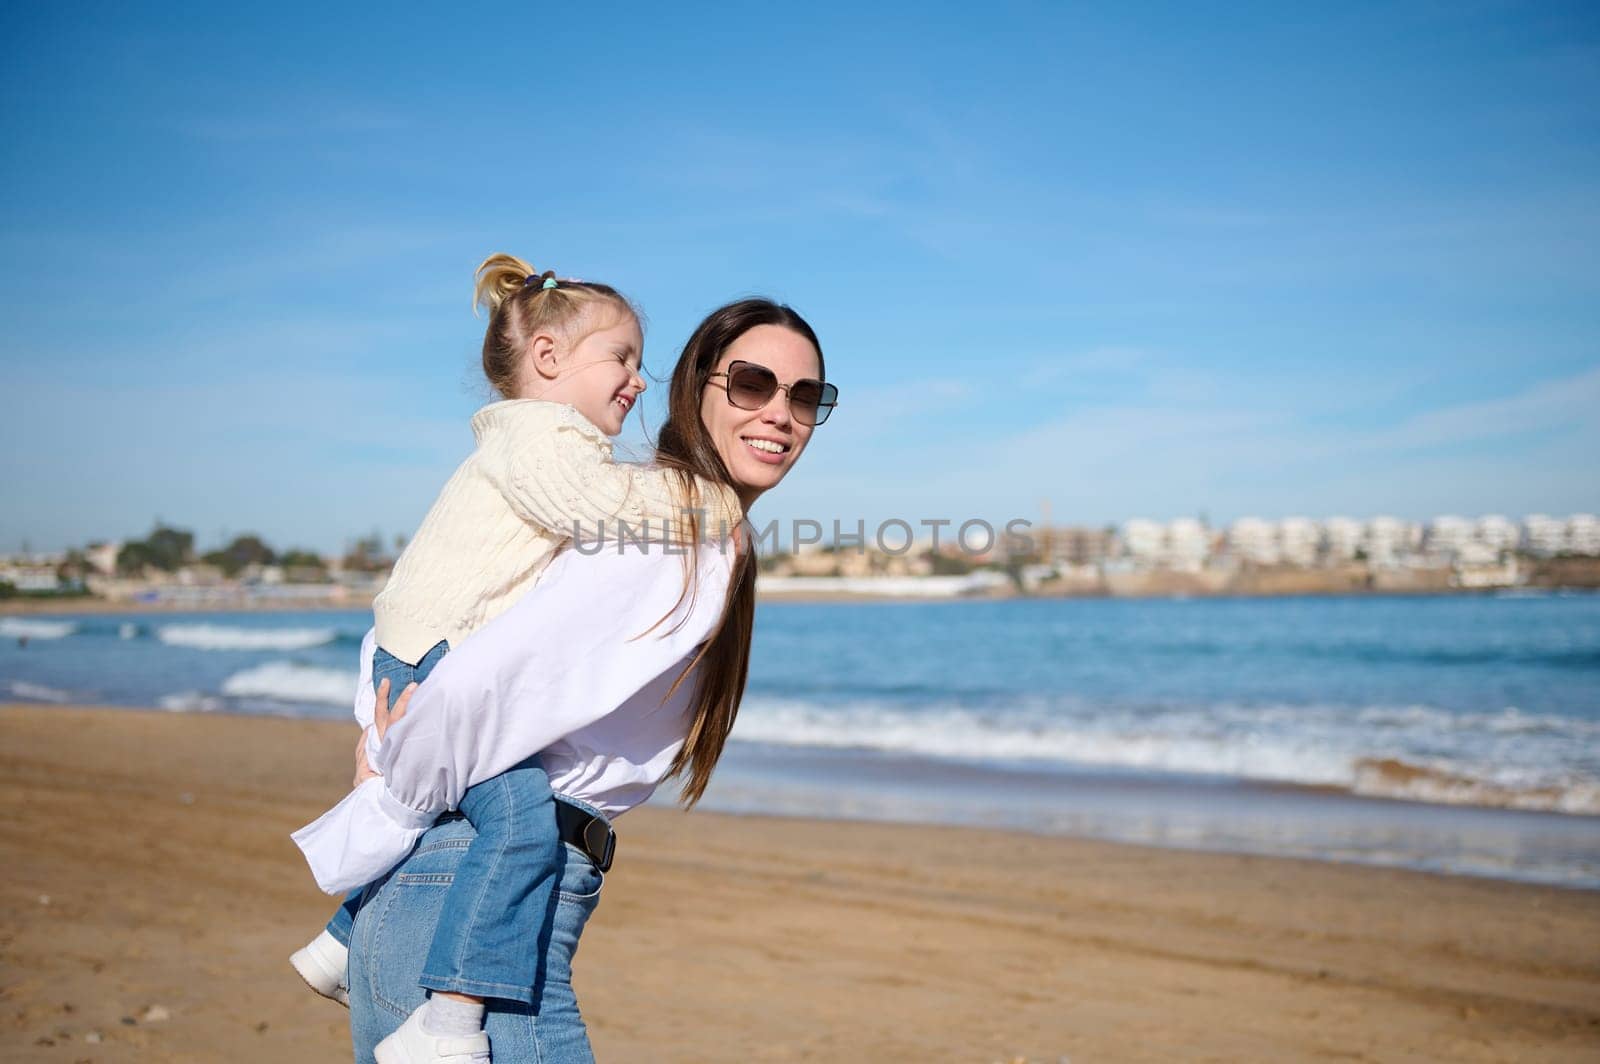 Happy mother and daughter playing on beach, carrying kid hugging, piggy back fun games, looking smiling outdoors. Family bonding together on summer holiday, travel activities recreation lifestyle.